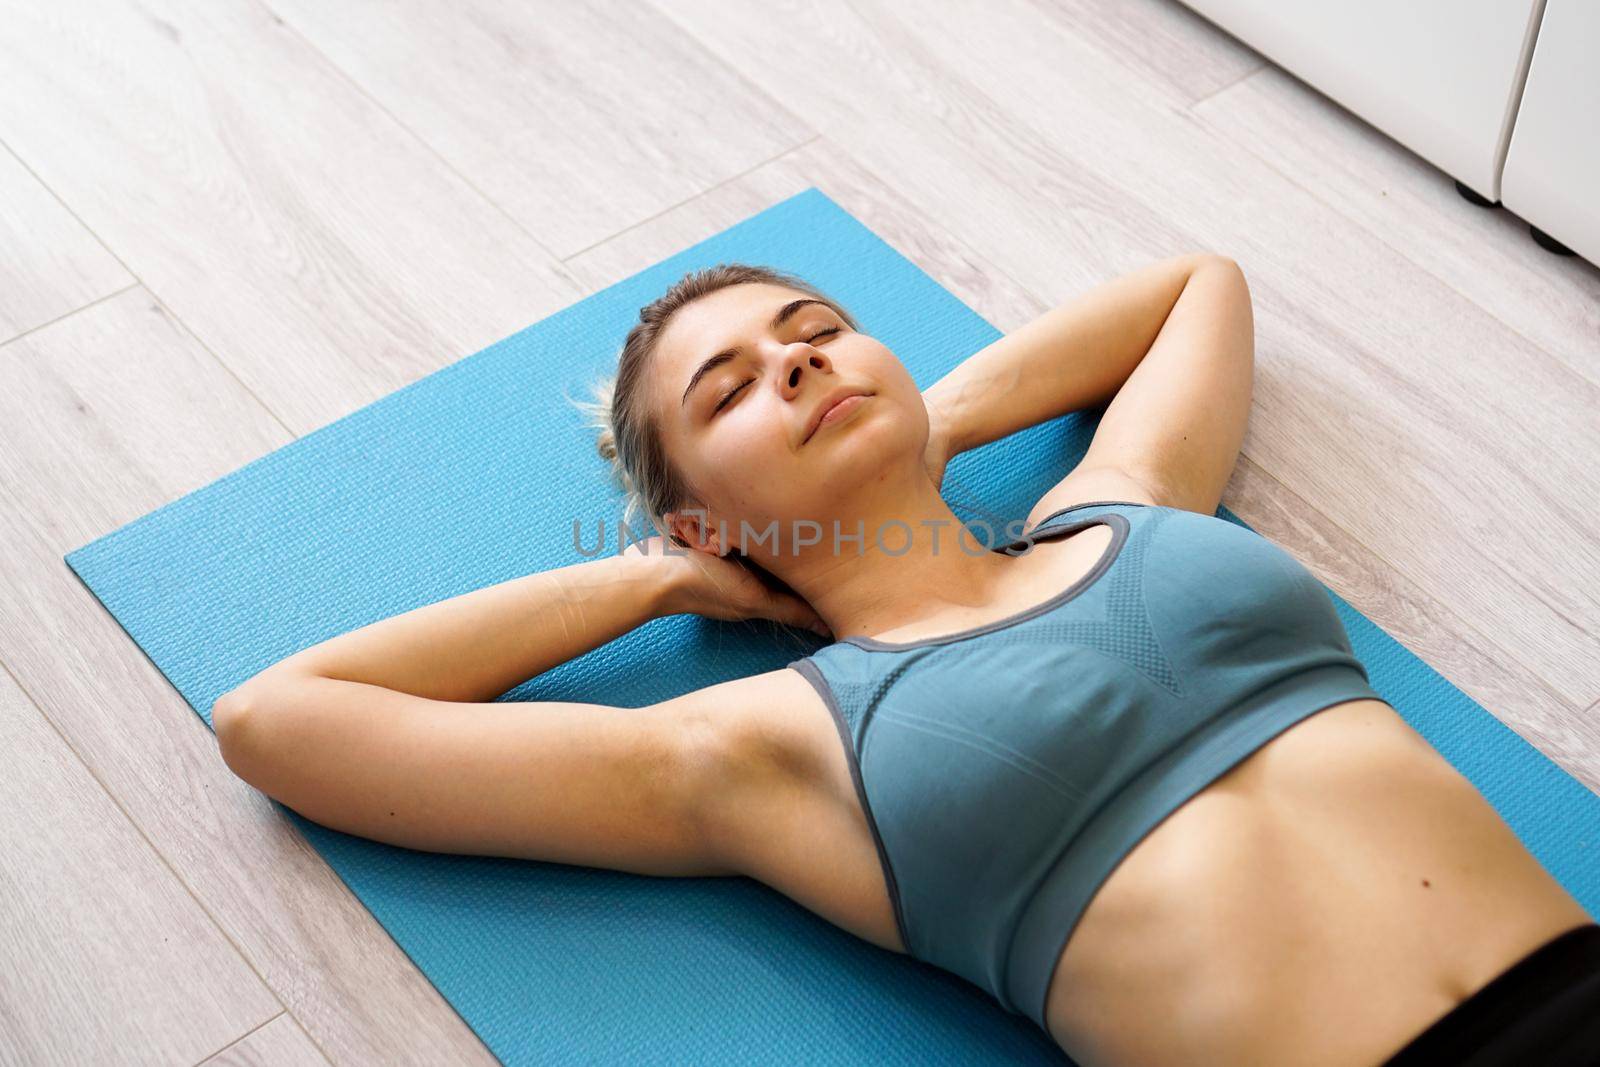 Top view of beautiful young woman lying on yoga mat after workout. Fit female relaxing on floor at home.